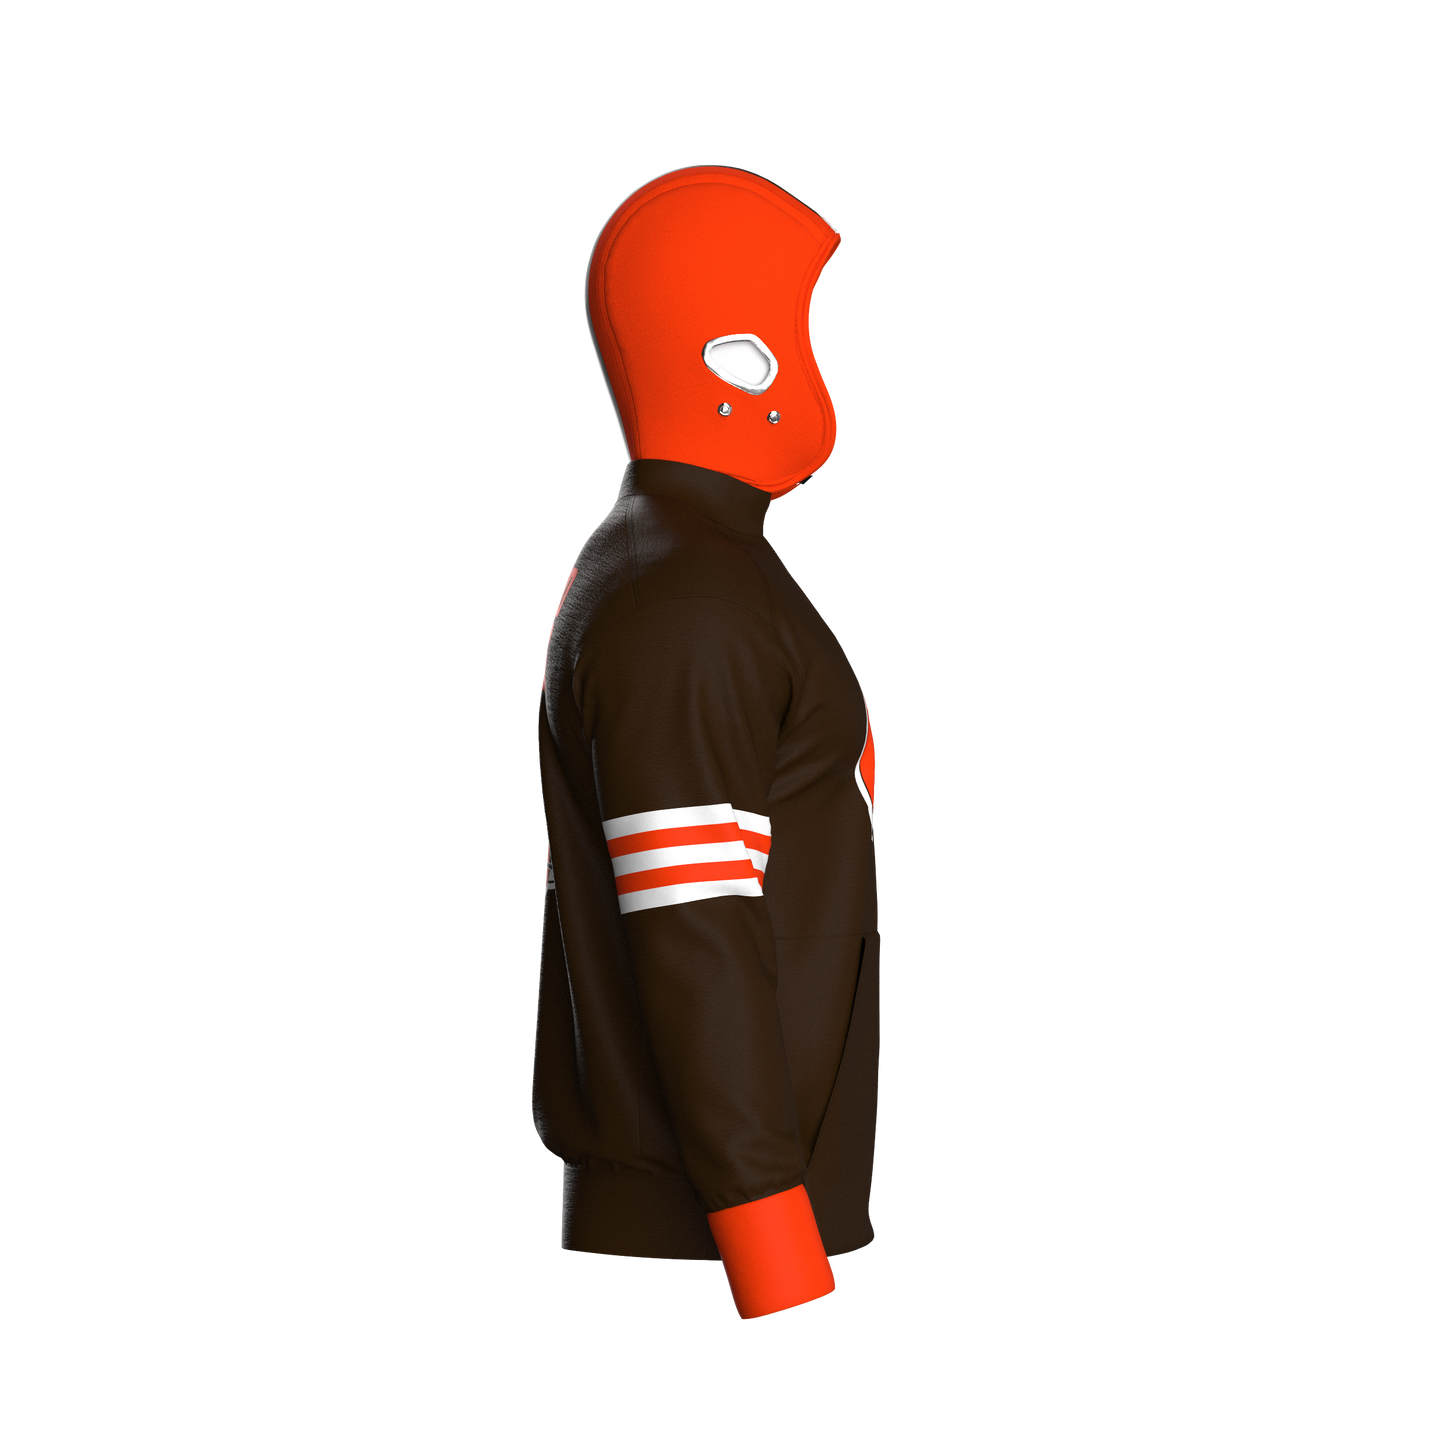 Cleveland Browns Home Pullover (adult)